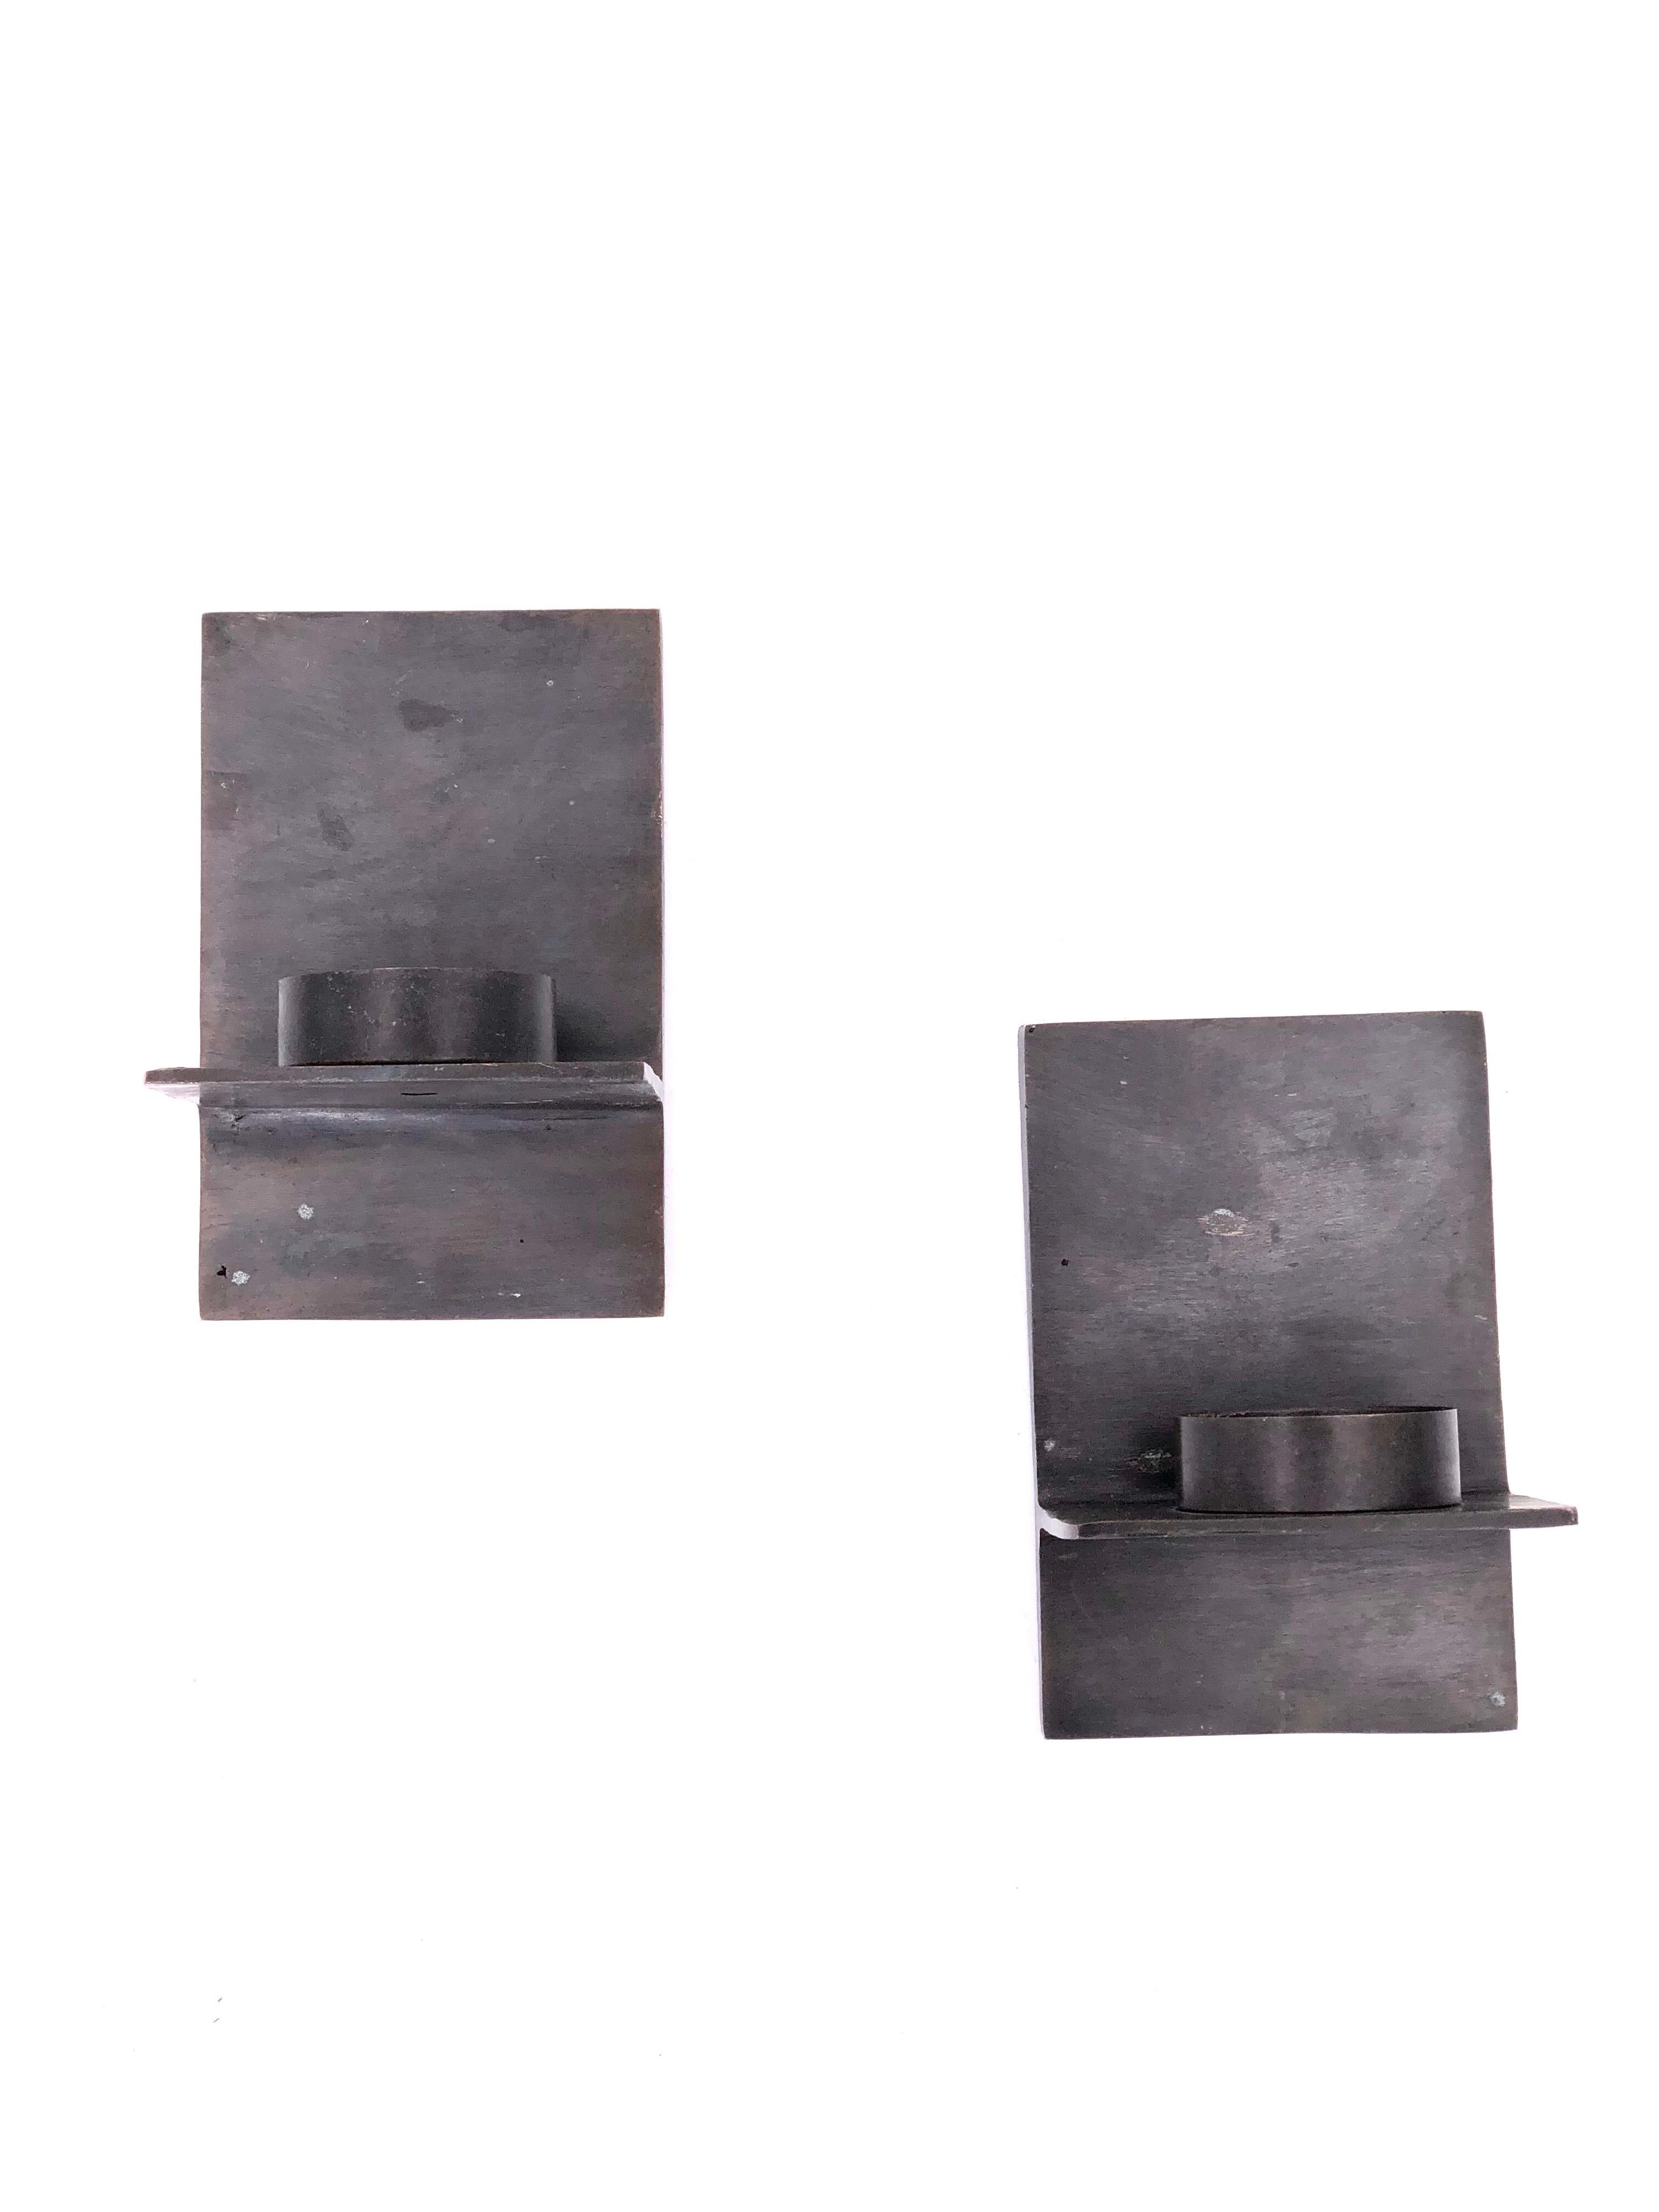 Nice modernist Minimalist pair of wall sconces, solid iron in a patinated bronze finish, solid easy to install, the diameter fits a candle up to 1.75